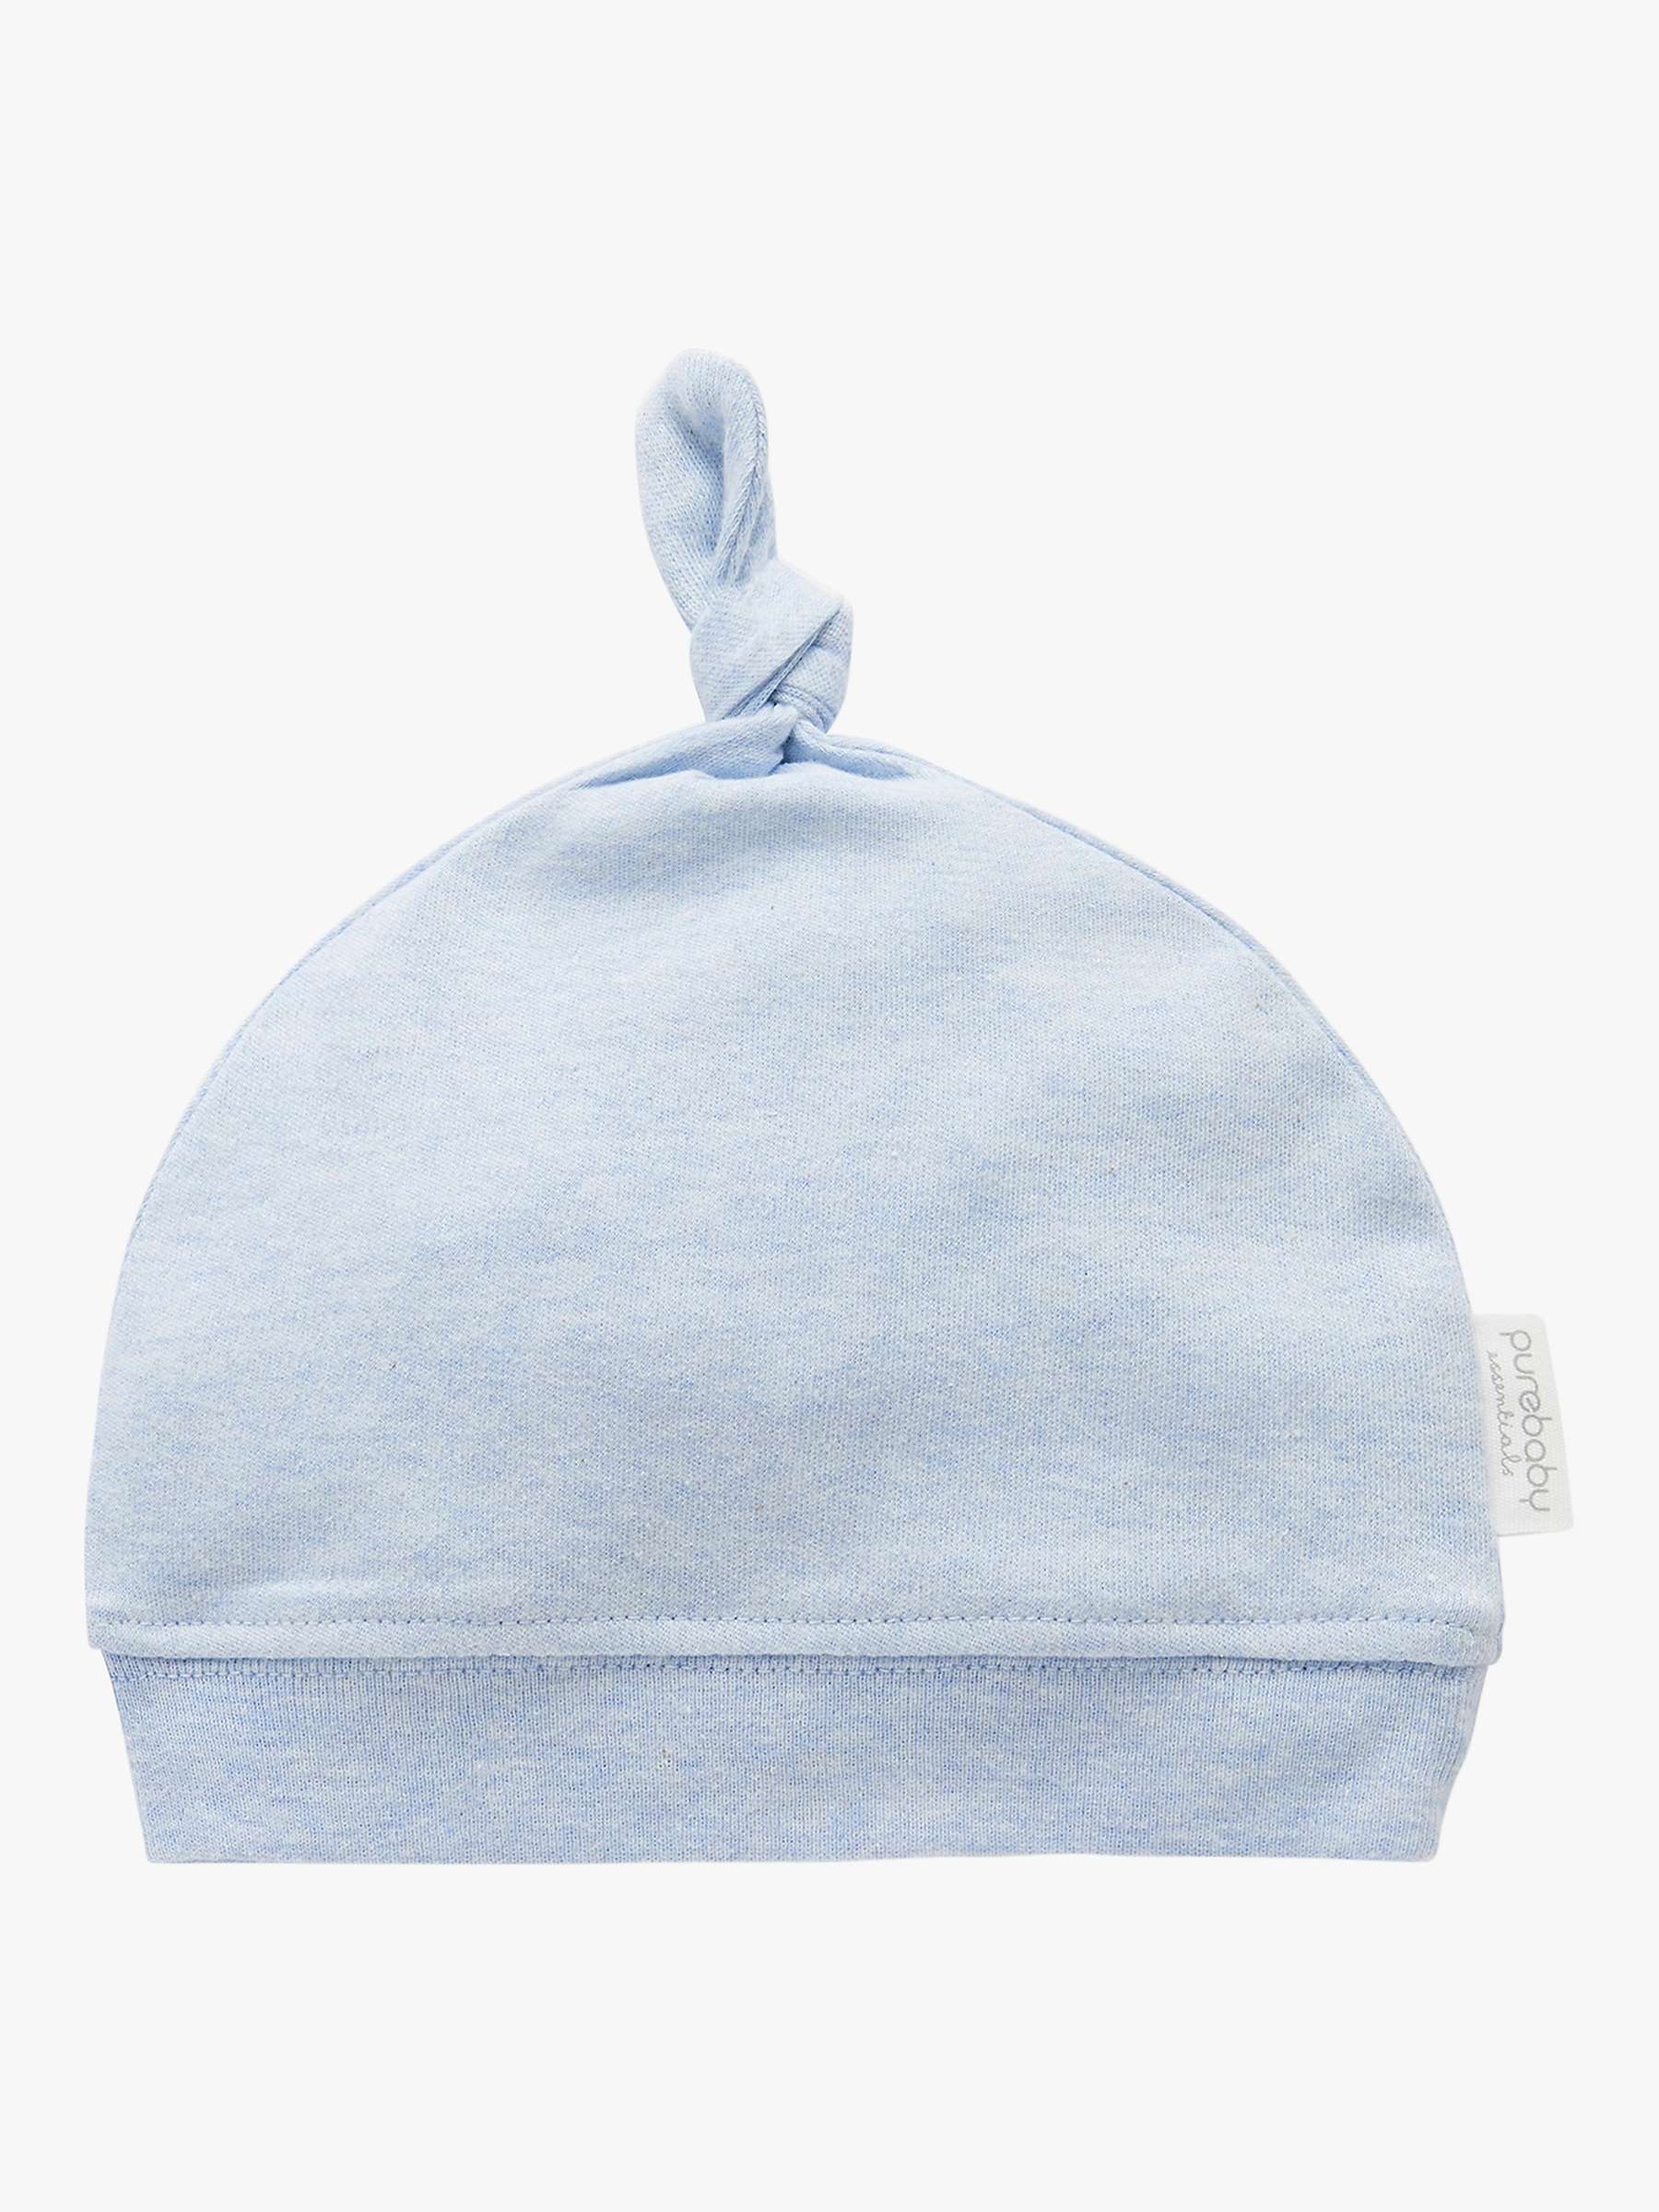 Buy Purebaby Knot Hat Online at johnlewis.com